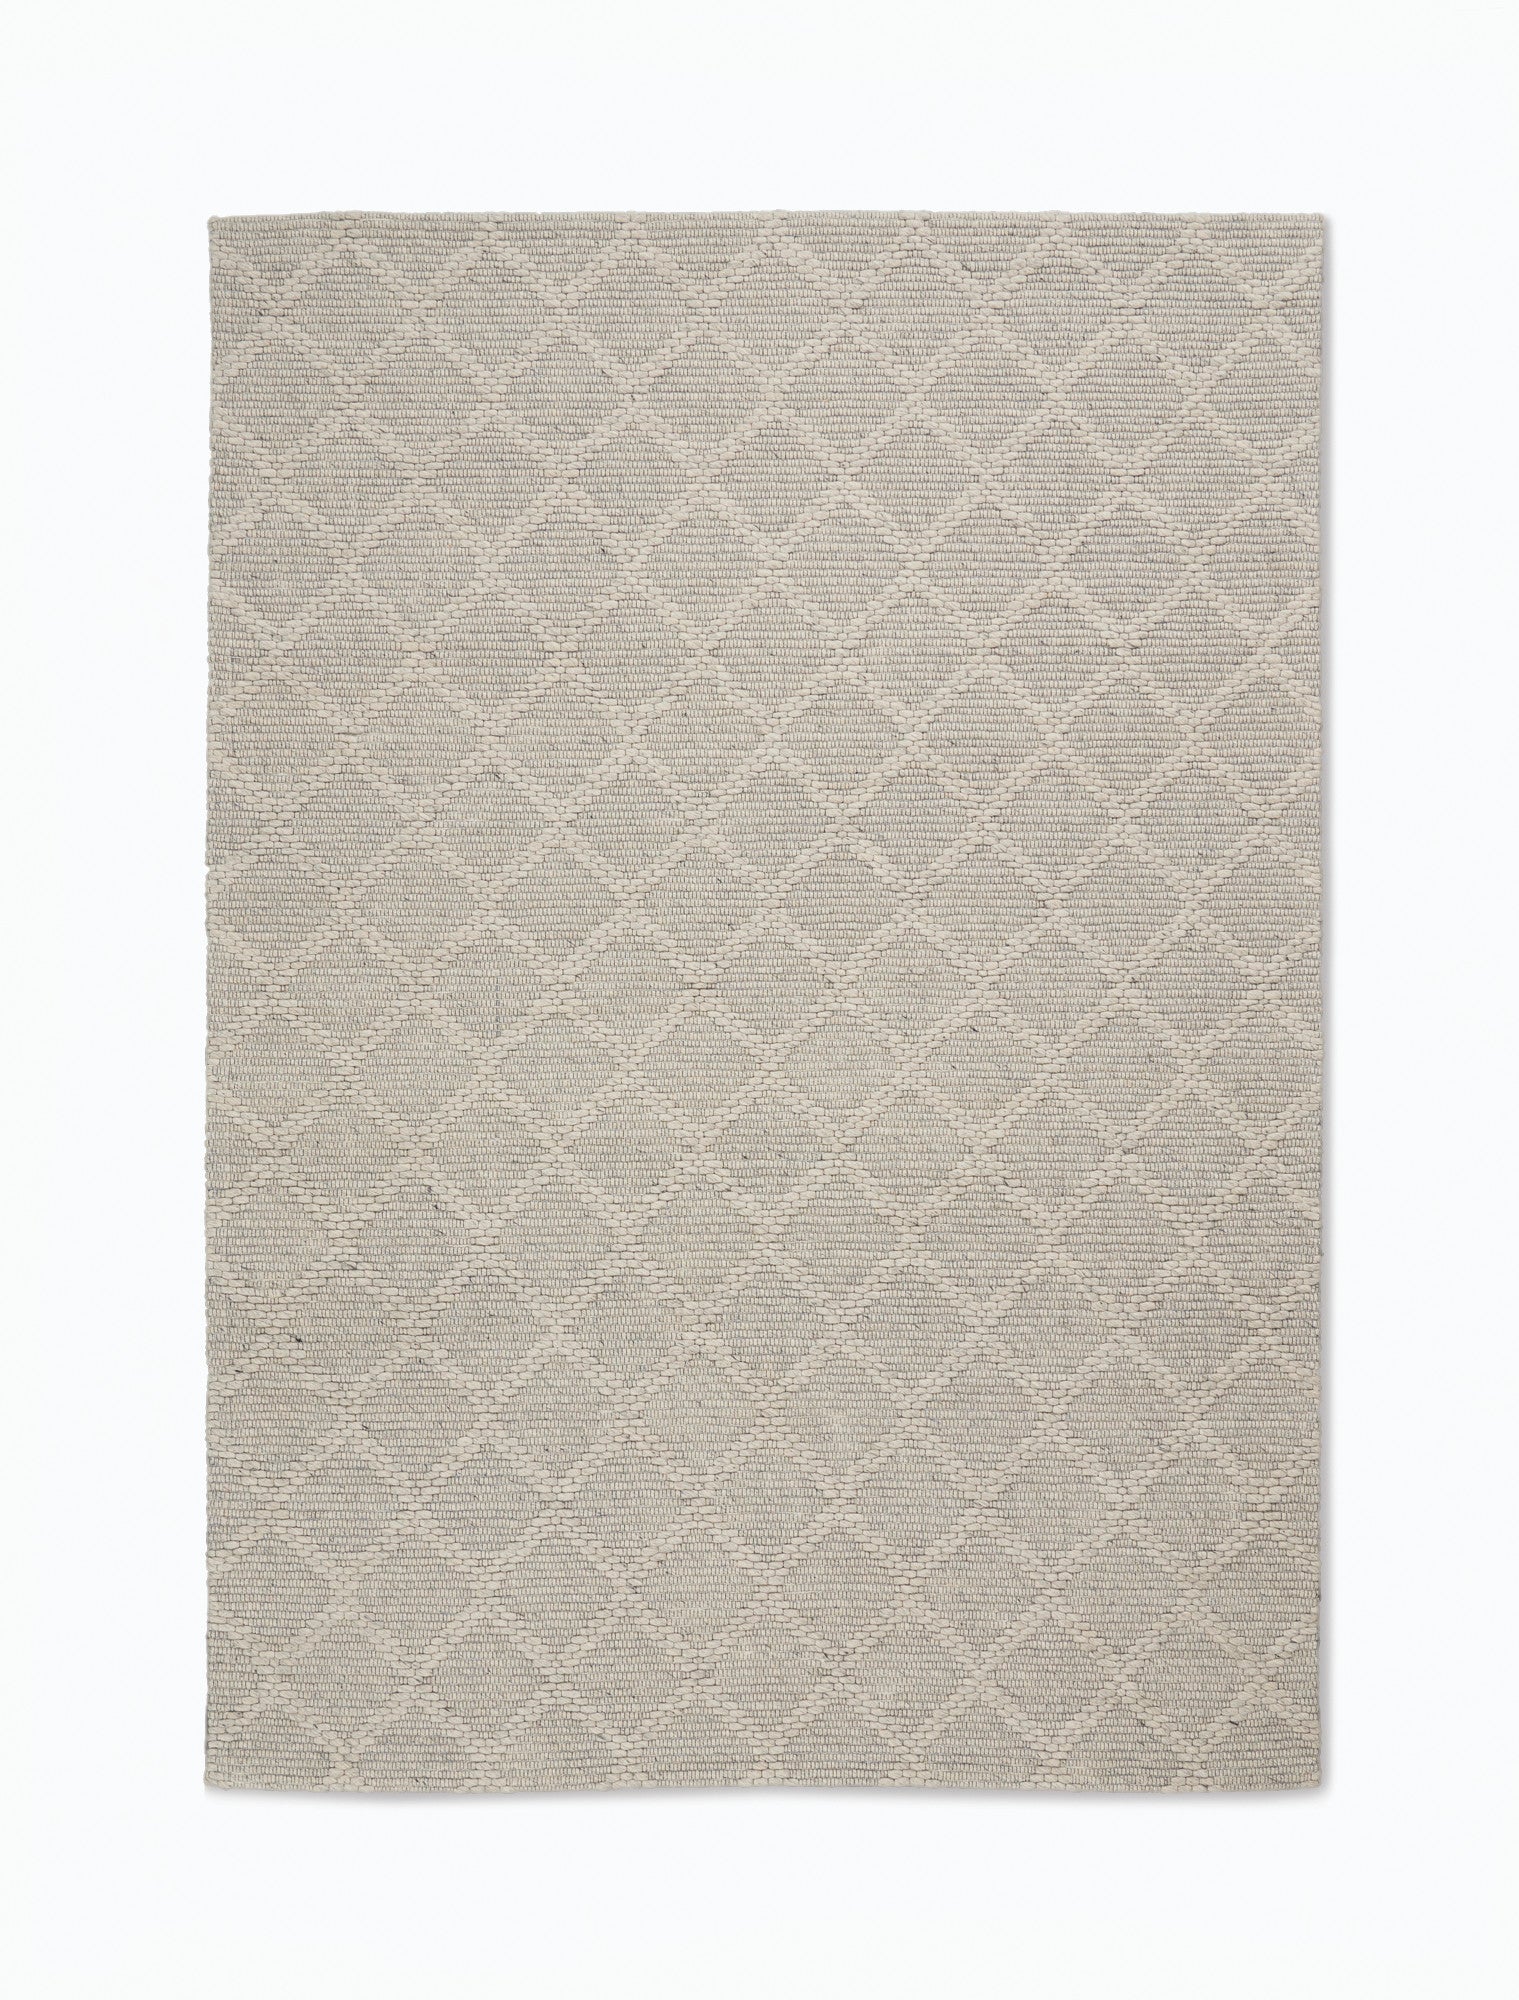 Calvin Klein Tallahassee CK840 Taupe Contemporary Woven Rug